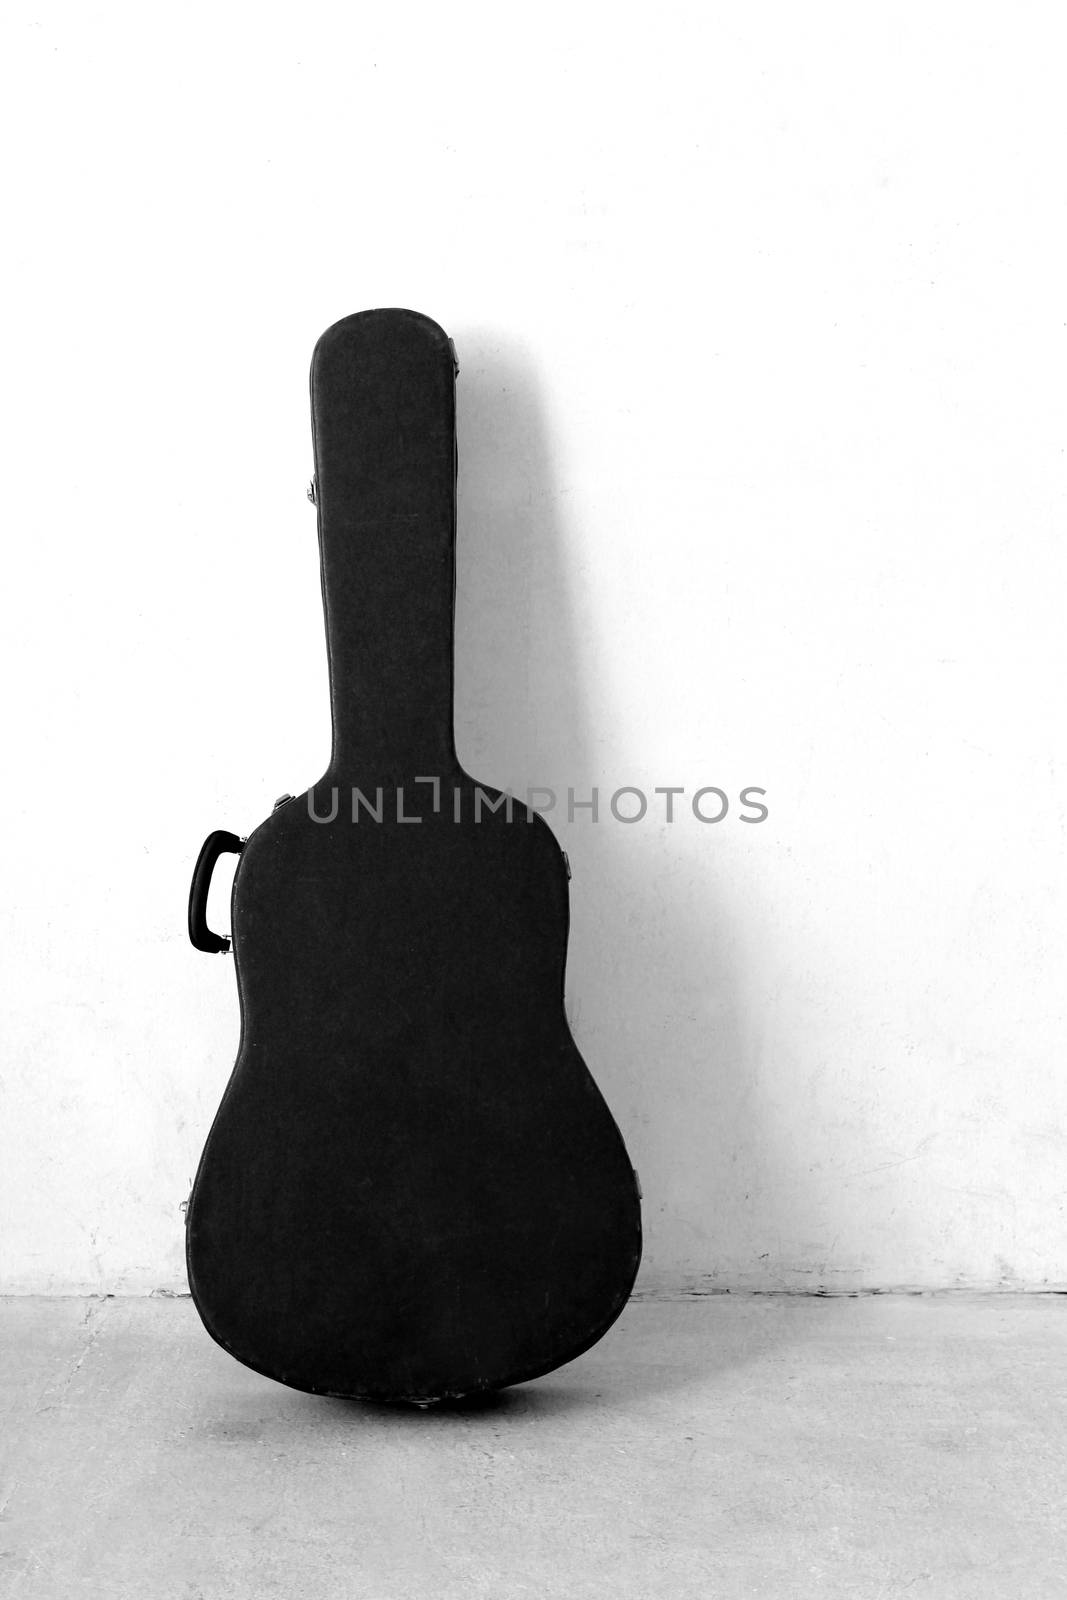 The Old Guitar case in black and white by nuchylee